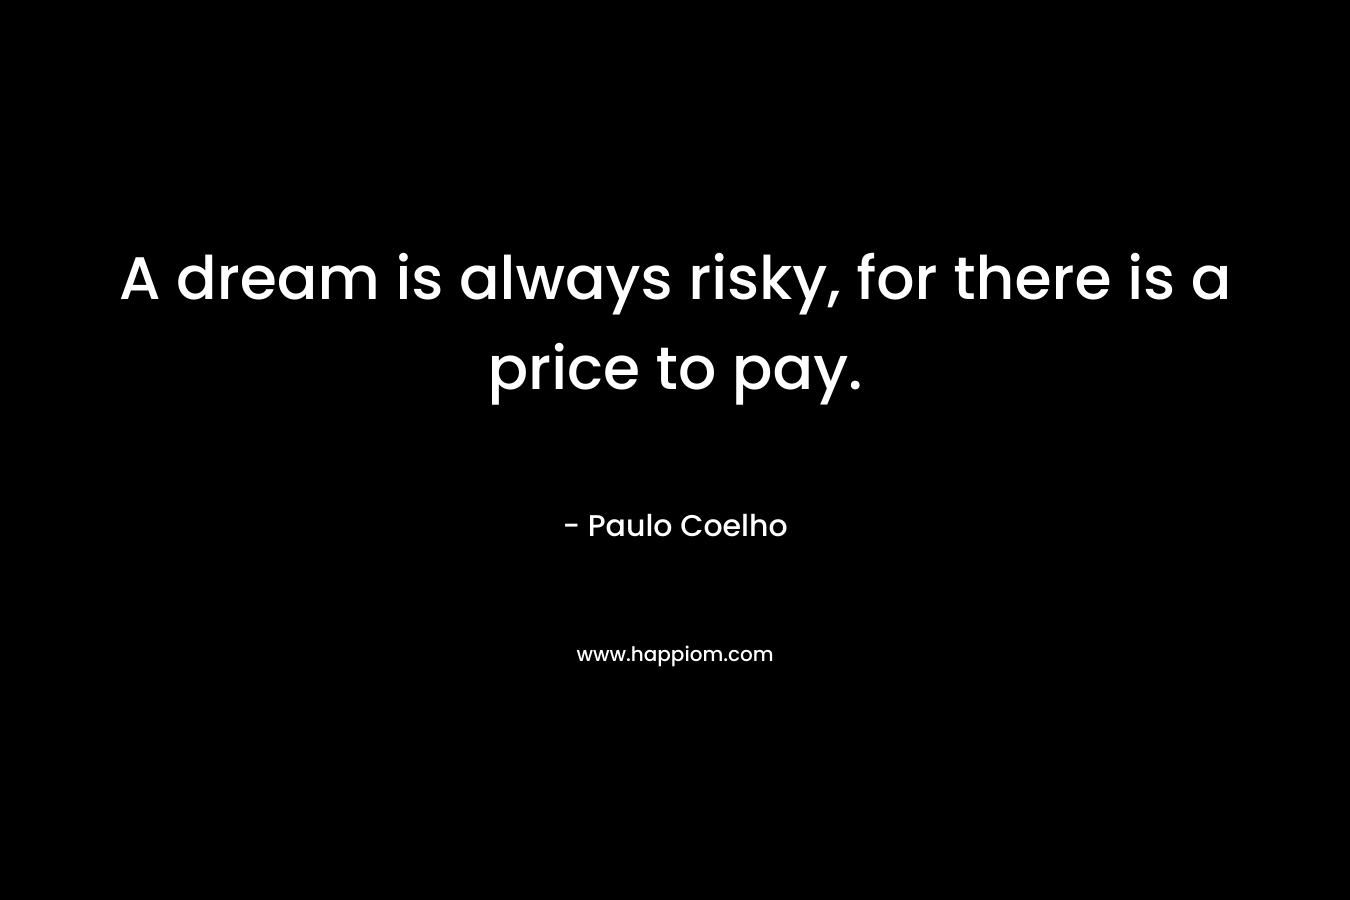 A dream is always risky, for there is a price to pay.